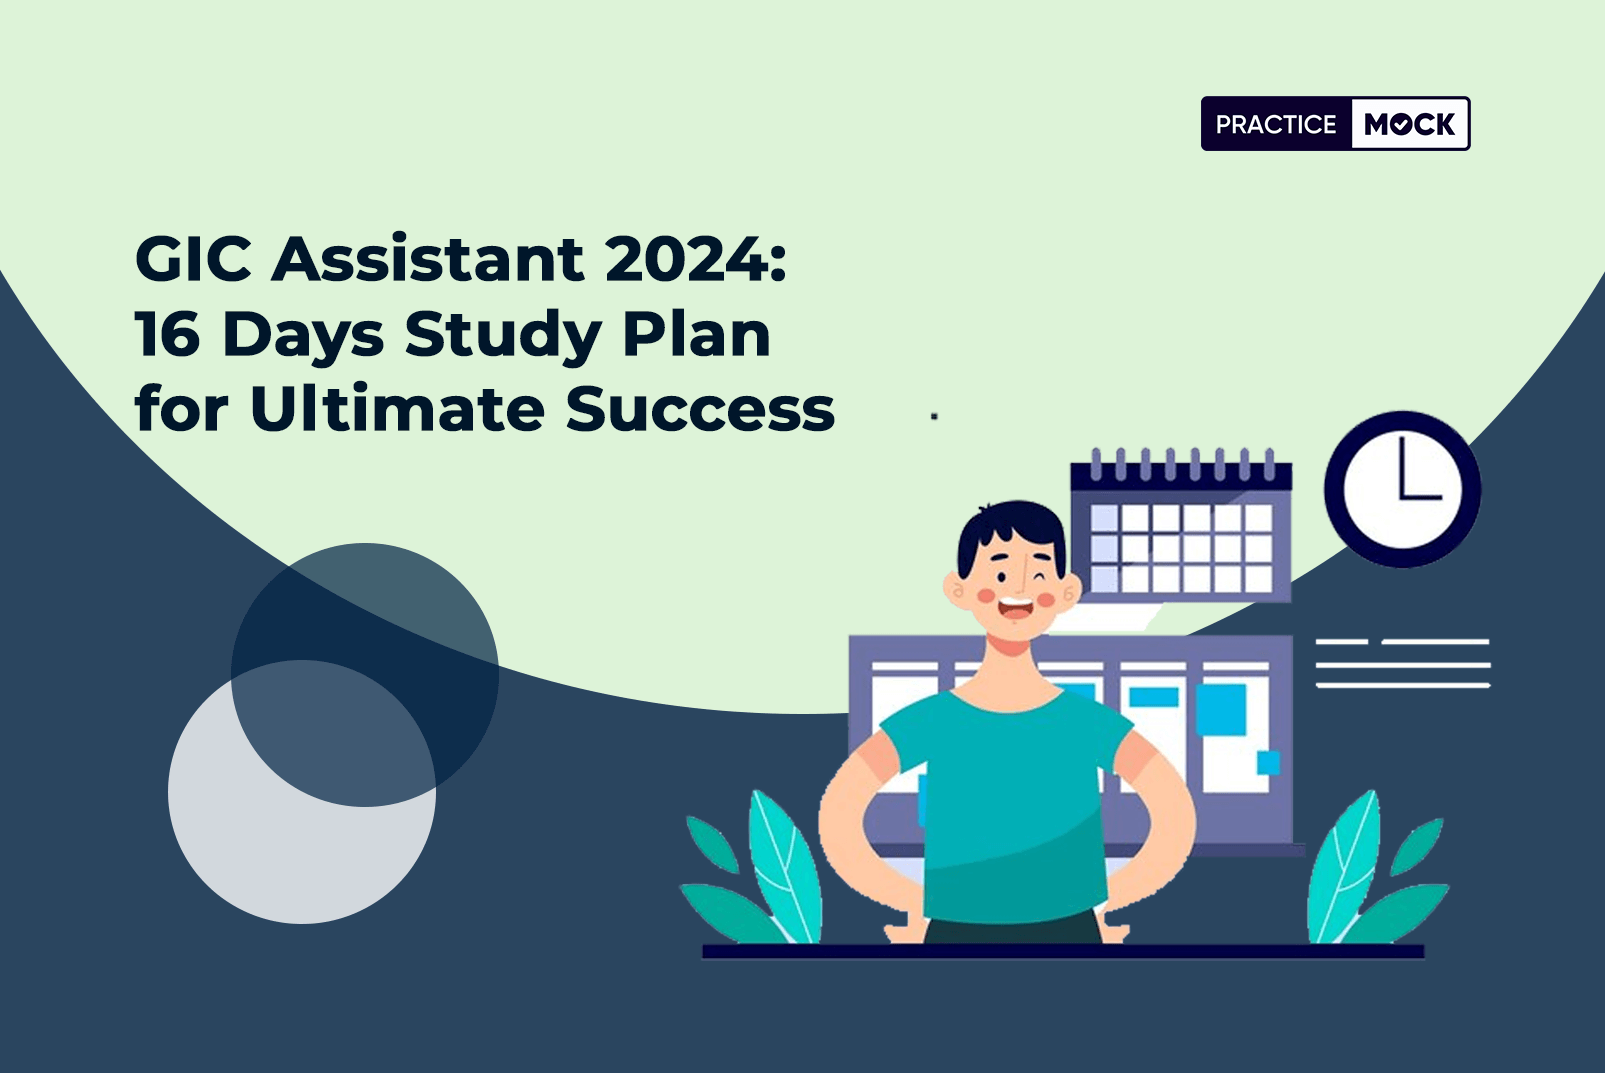 GIC Assistant Manager 2024: 16 Days Study Plan for Ultimate Success